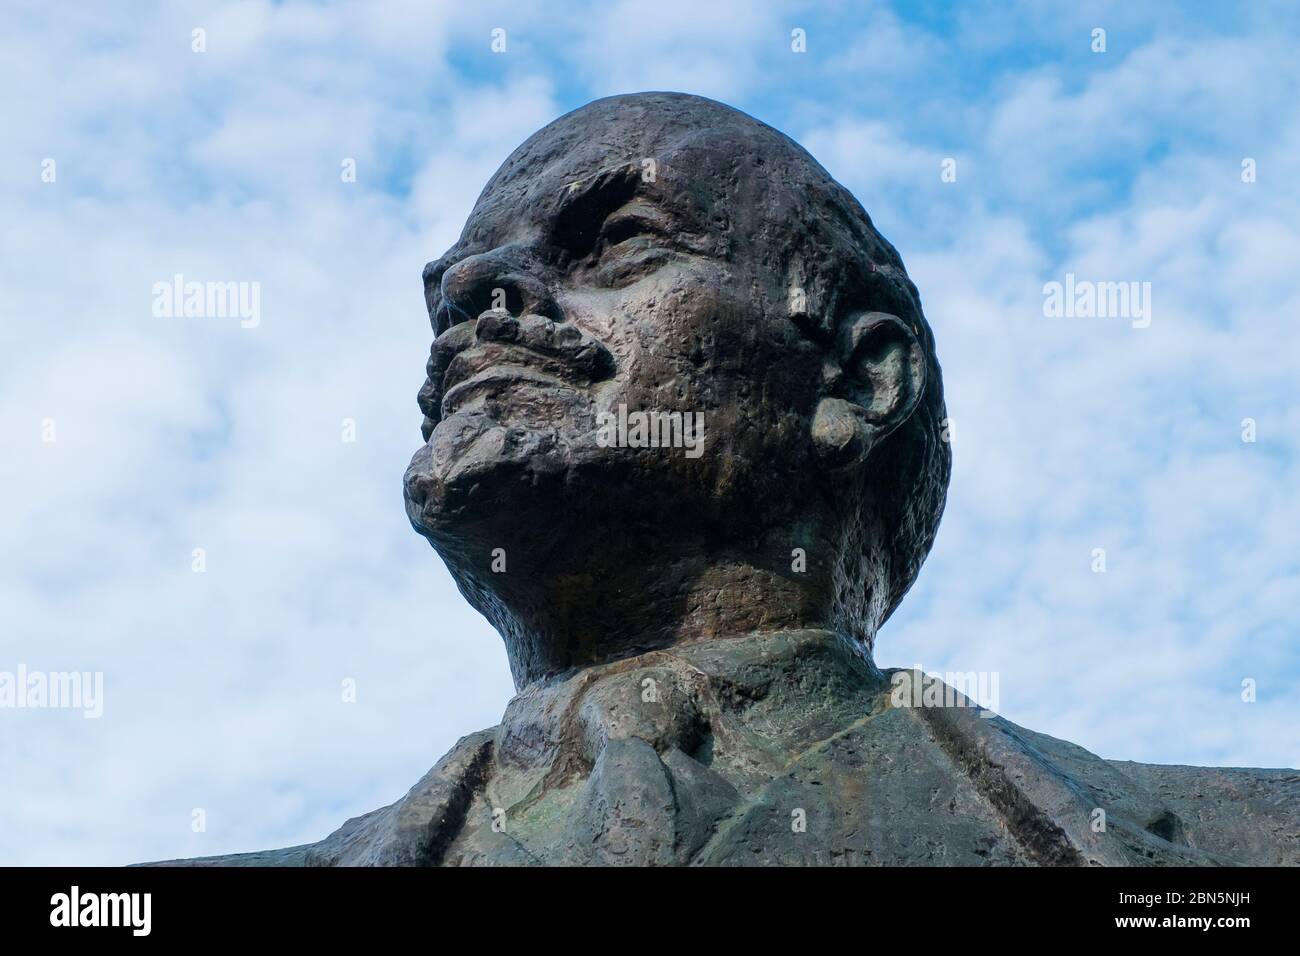 A close up of the head of a bronze statue of Lenin. At Gruto Parkas near Druskininkai, Lithuania. Stock Photo